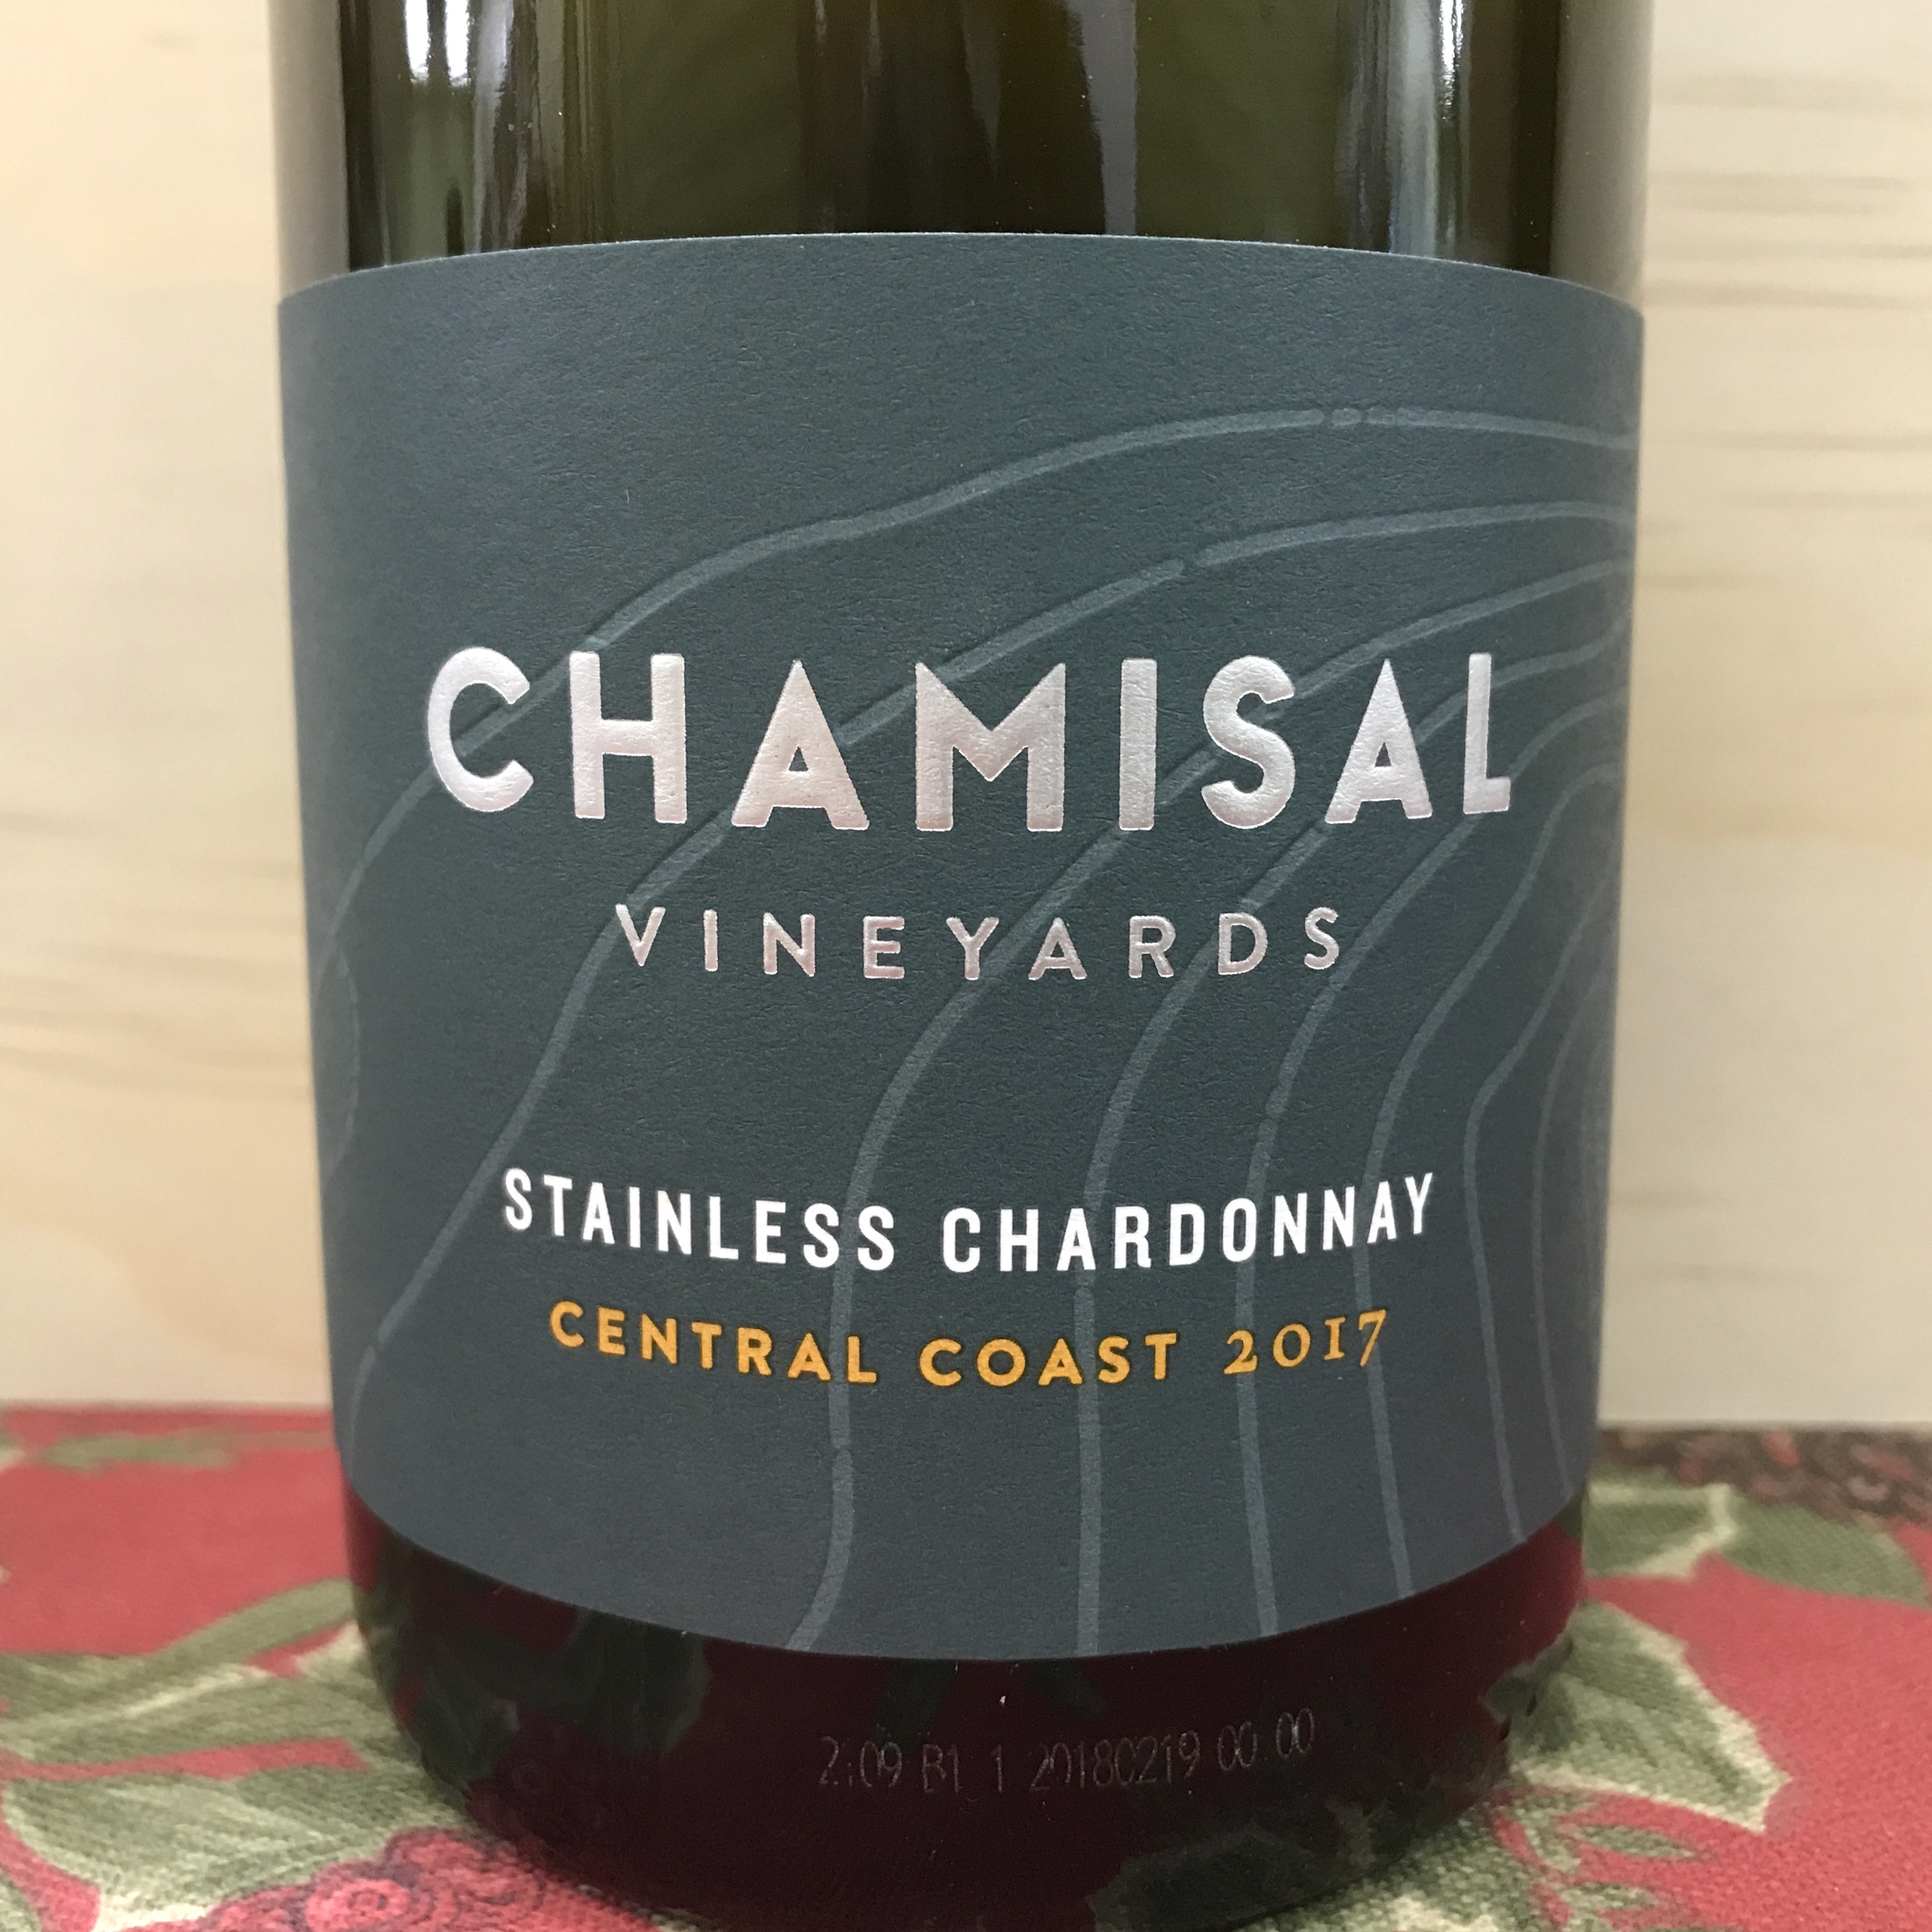 Chamisal Chardonnay Central Coast Stainless 2017